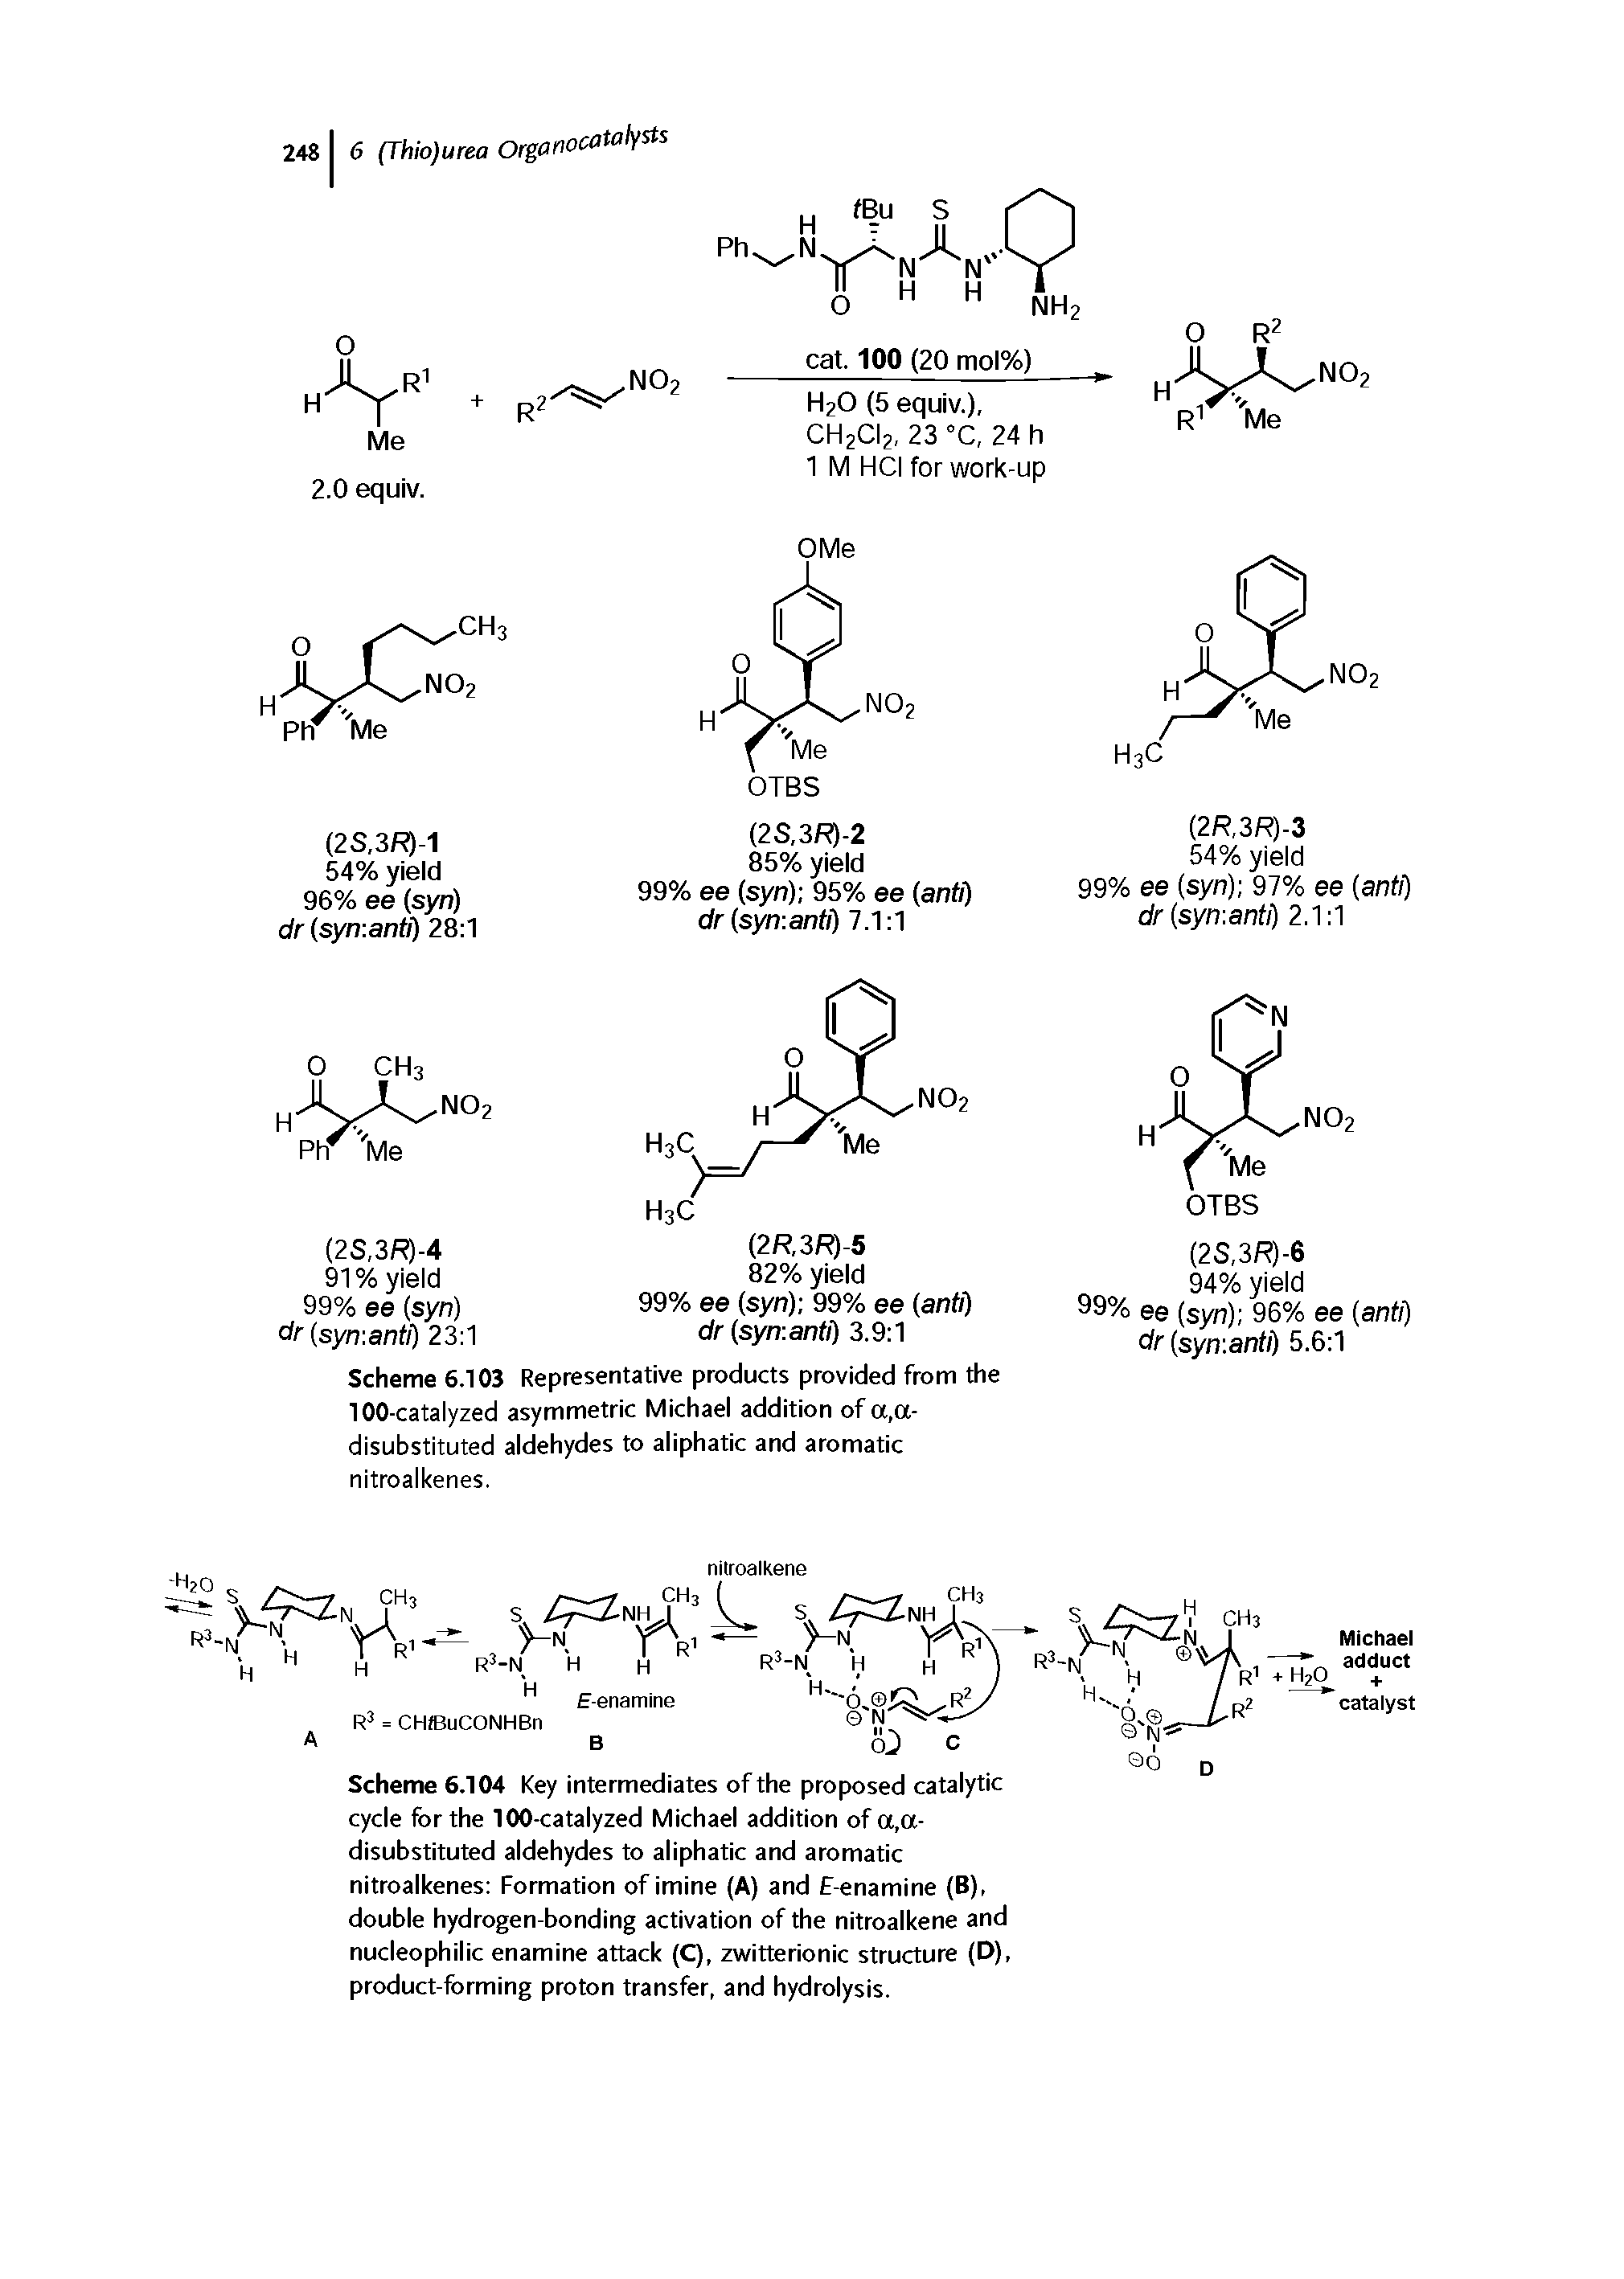 Scheme 6.104 Key intermediates of the proposed catalytic cycle for the 100-catalyzed Michael addition of a,a-disubstituted aldehydes to aliphatic and aromatic nitroalkenes Formation of imine (A) and F-enamine (B), double hydrogen-bonding activation of the nitroalkene and nucleophilic enamine attack (C), zwitterionic structure (D), product-forming proton transfer, and hydrolysis.